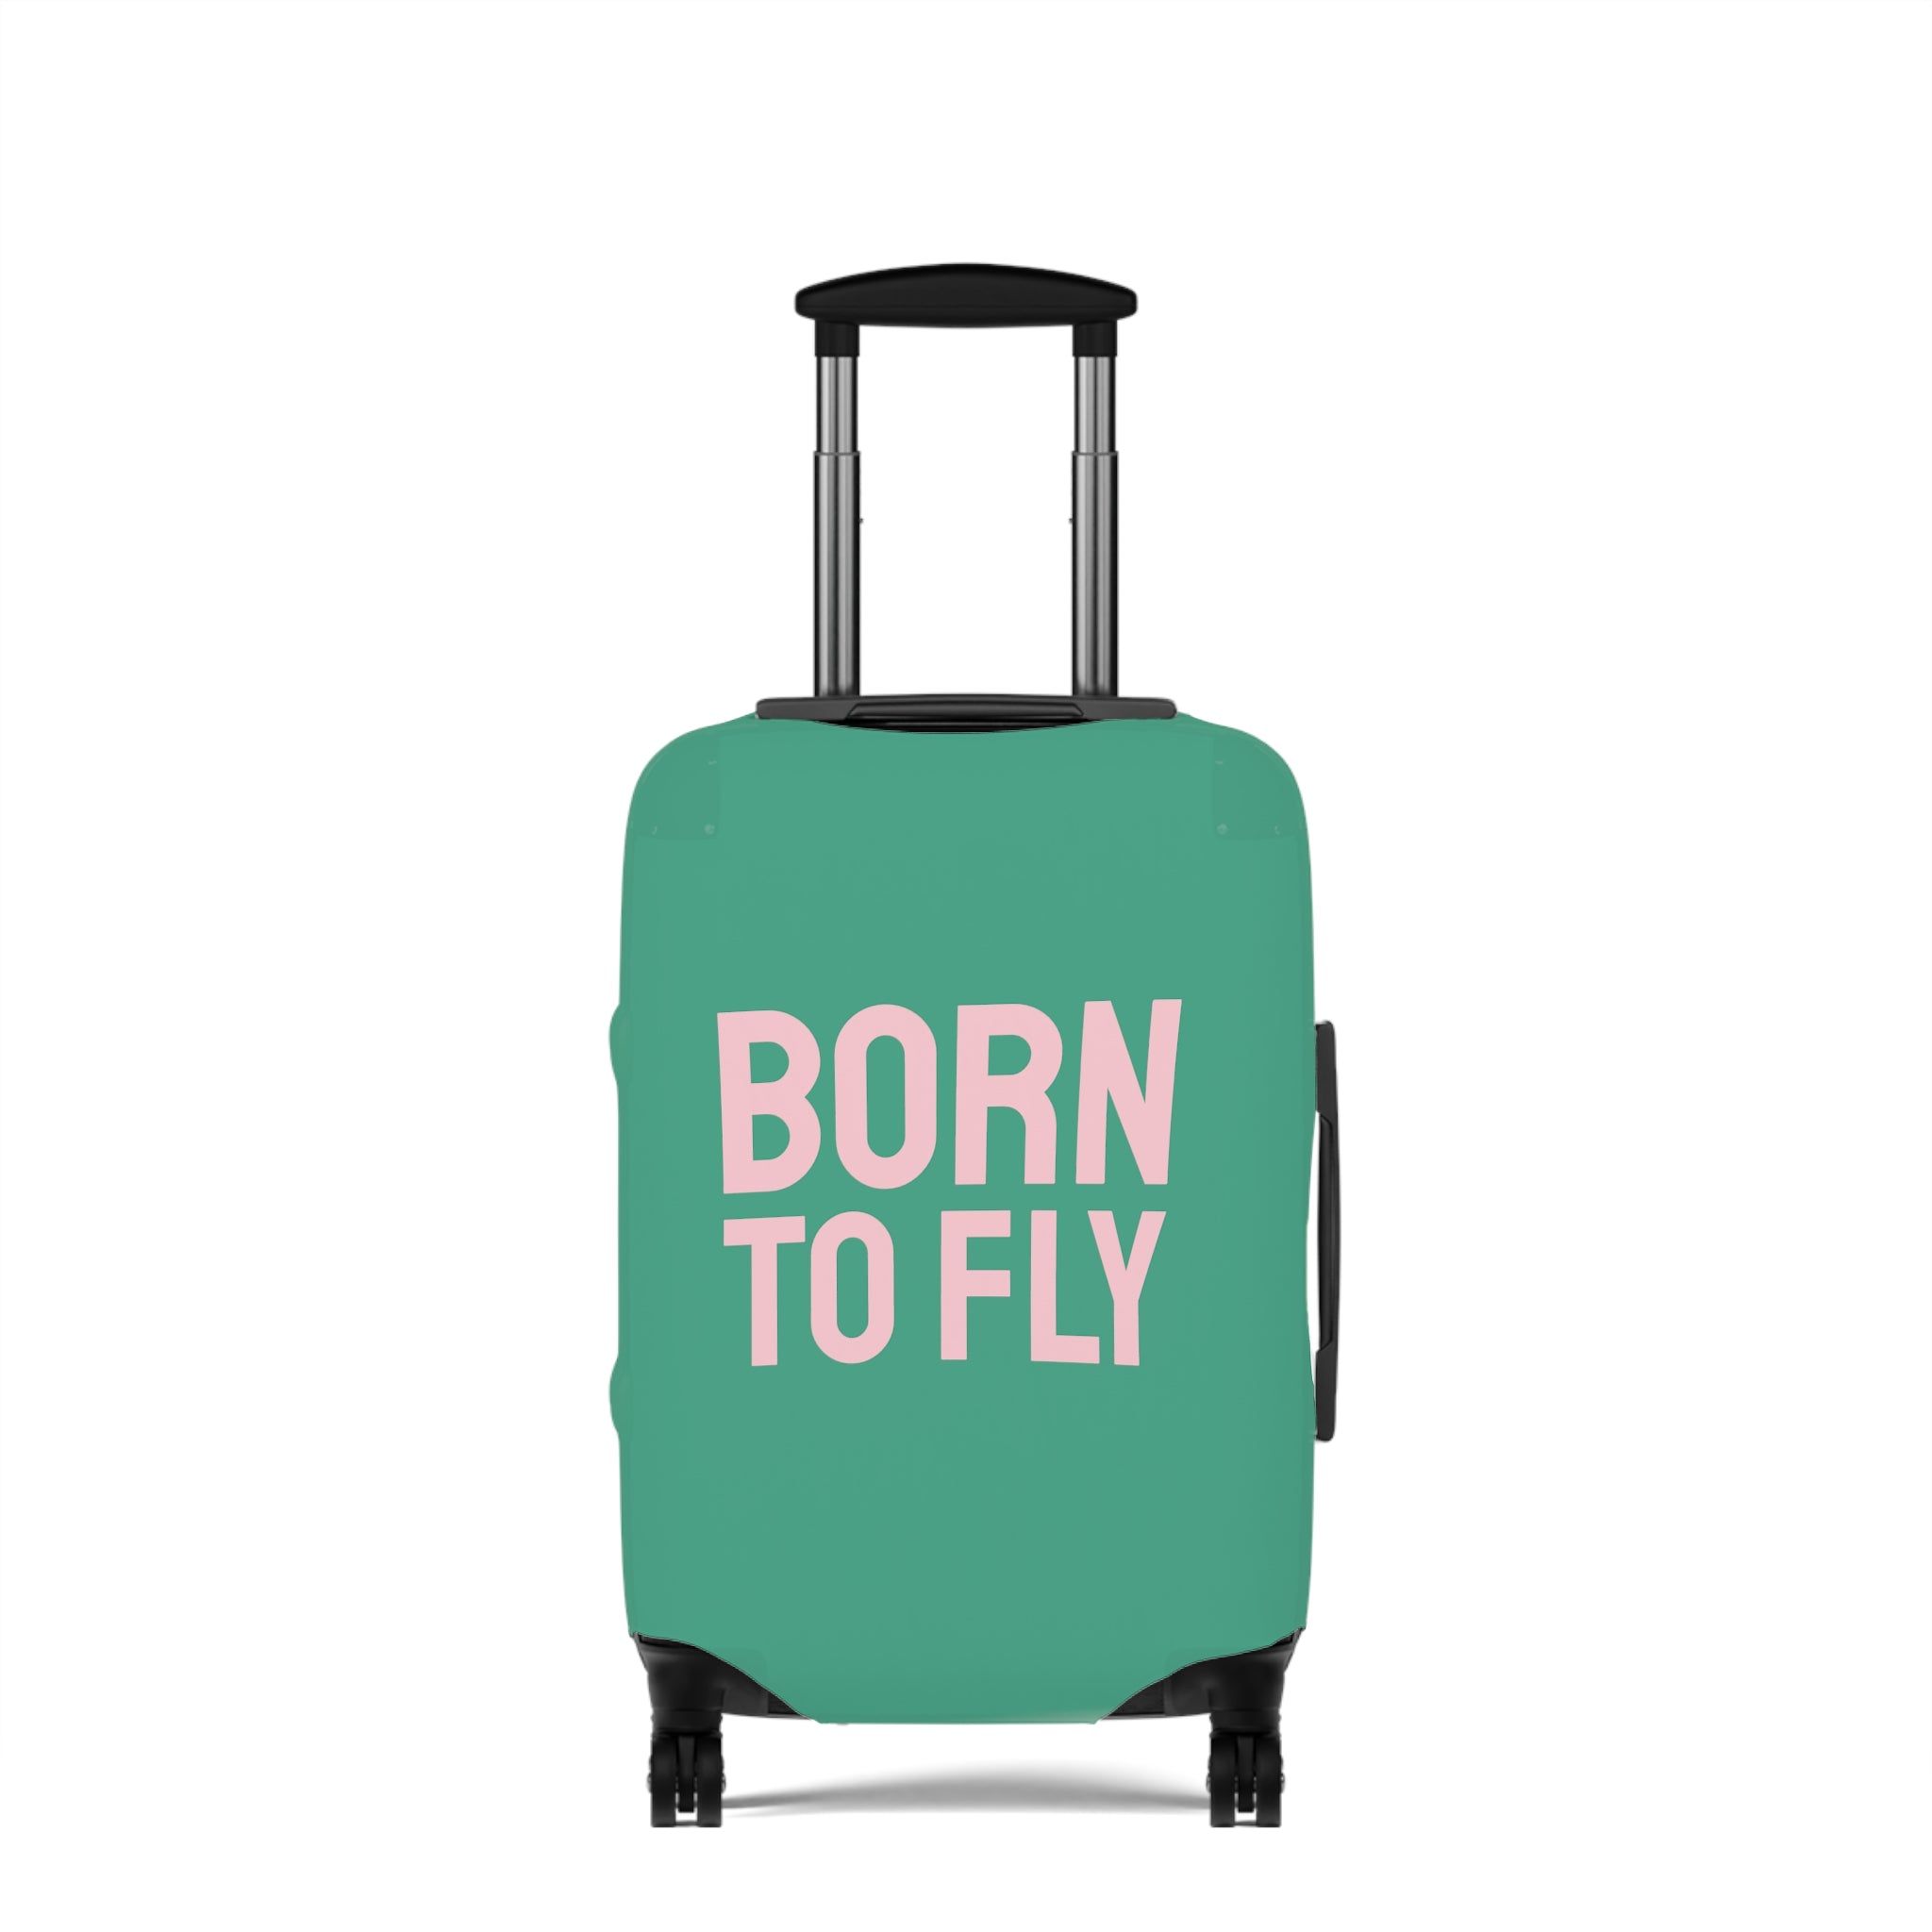 Born to fly Luggage Cover (Green)